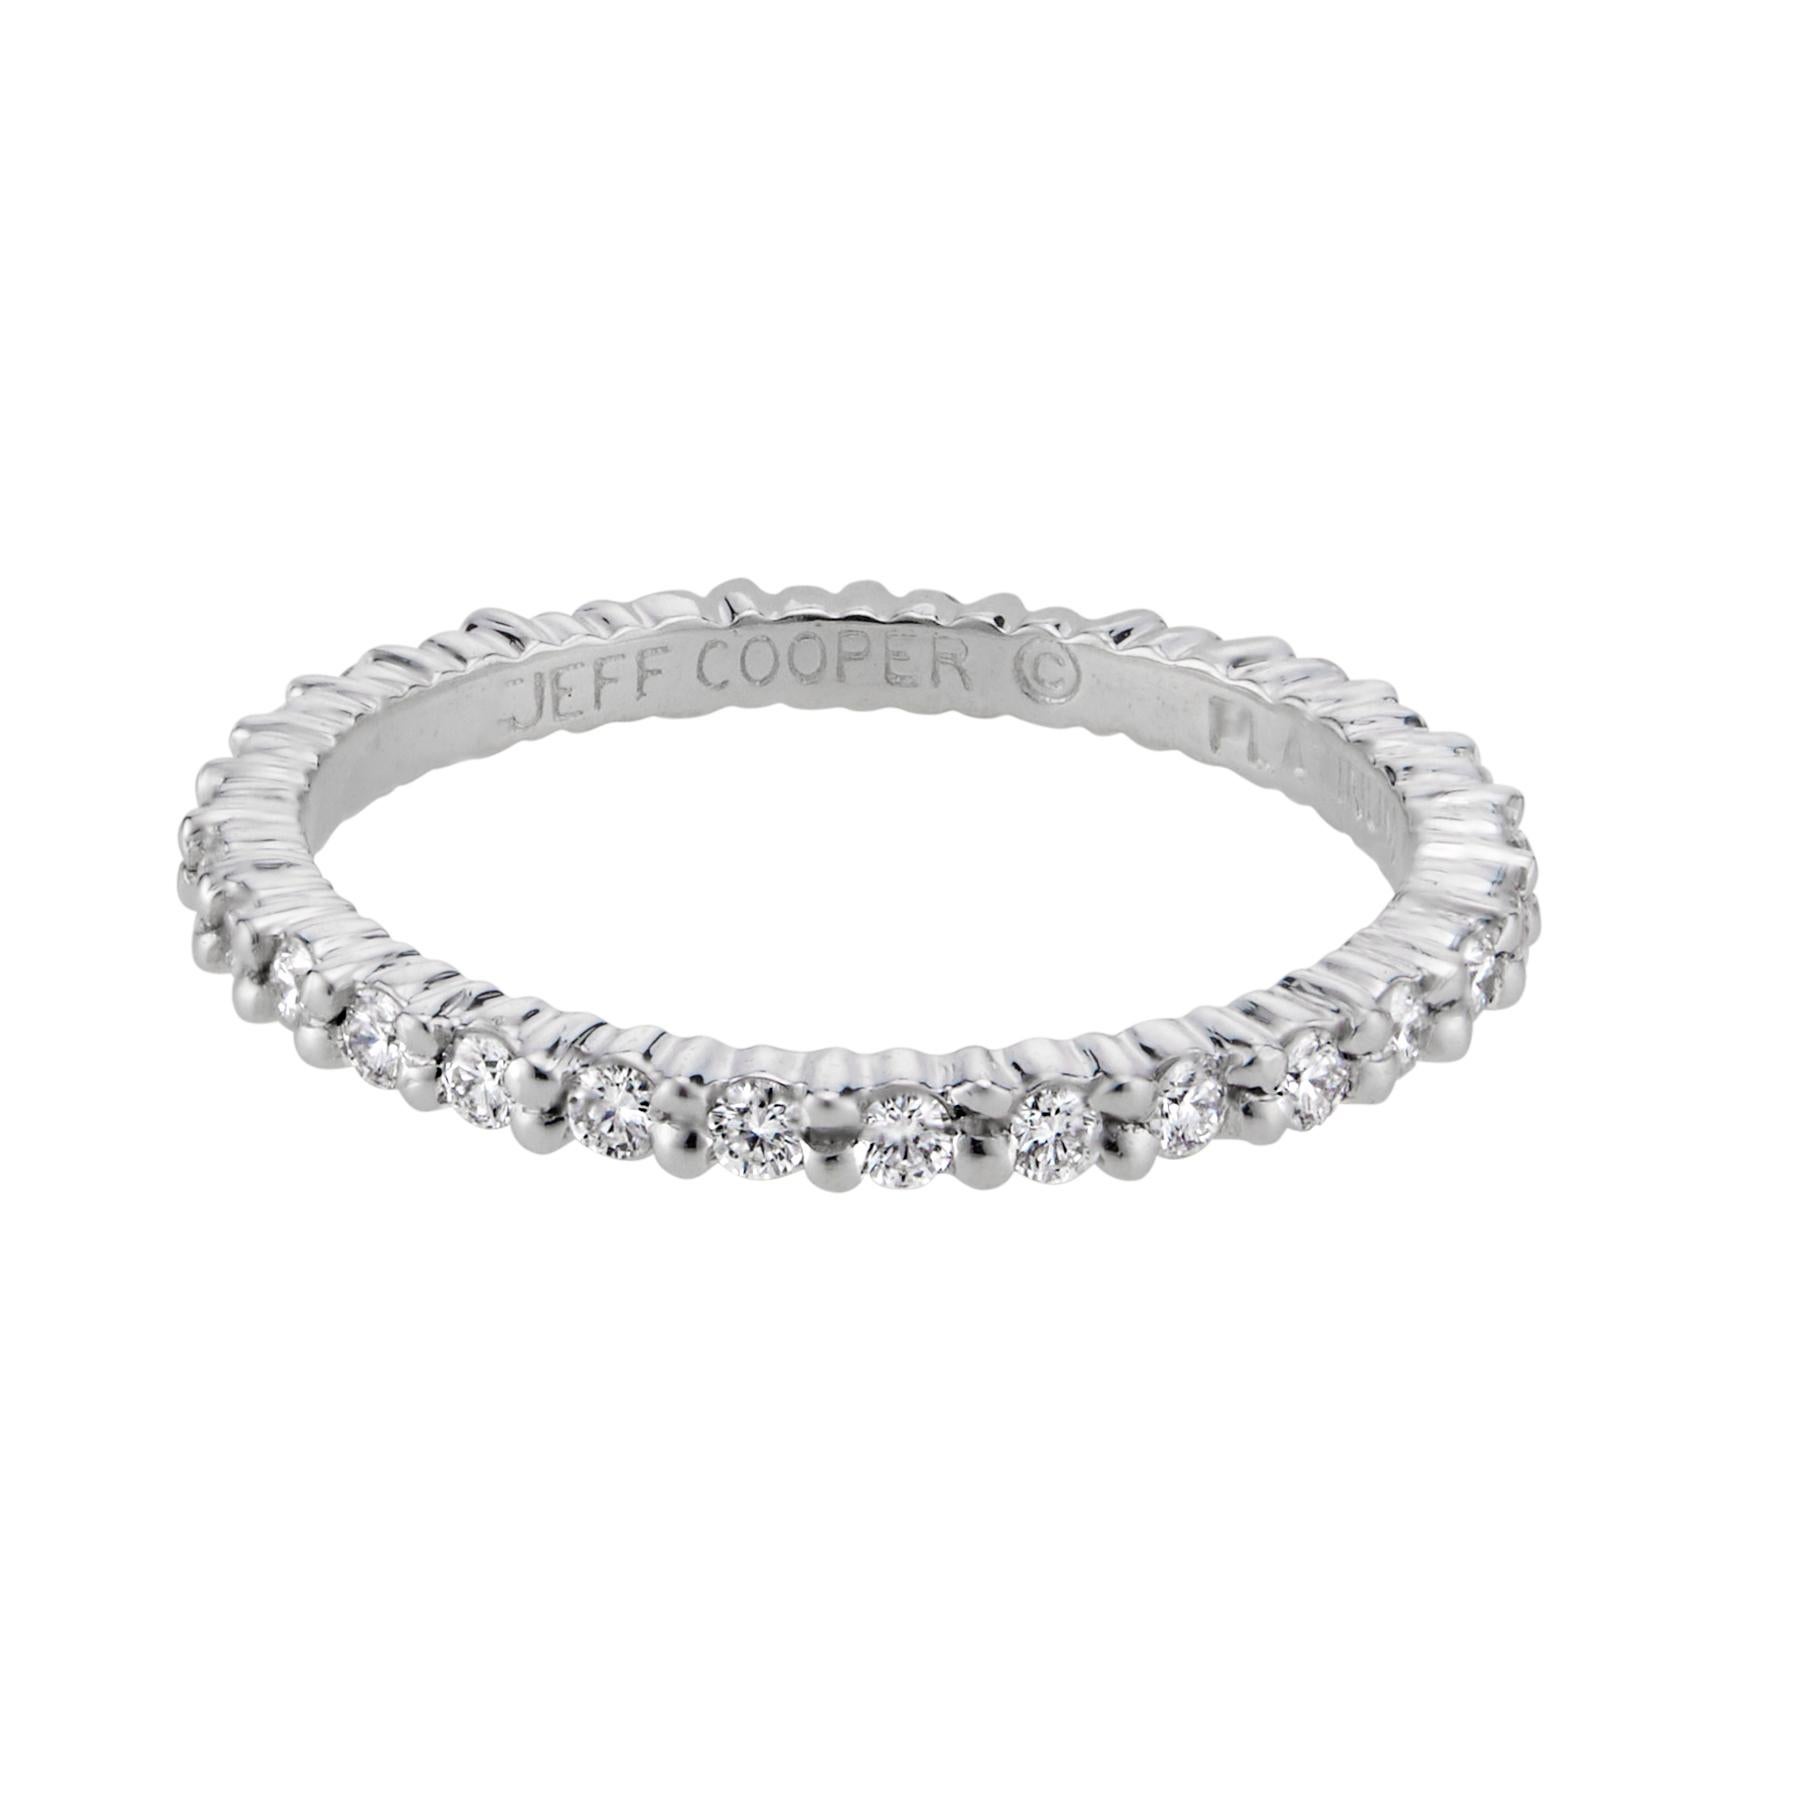 Diamond eternity wedding band ring. 29 round diamonds in common prong solid platinum setting. By Jeff Cooper

29 round brilliant cut diamonds, G VS approx. .55cts
Size 6 and not sizable
Platinum 
Stamped: Platinum 
Hallmark: Jeff Cooper
2.4 grams